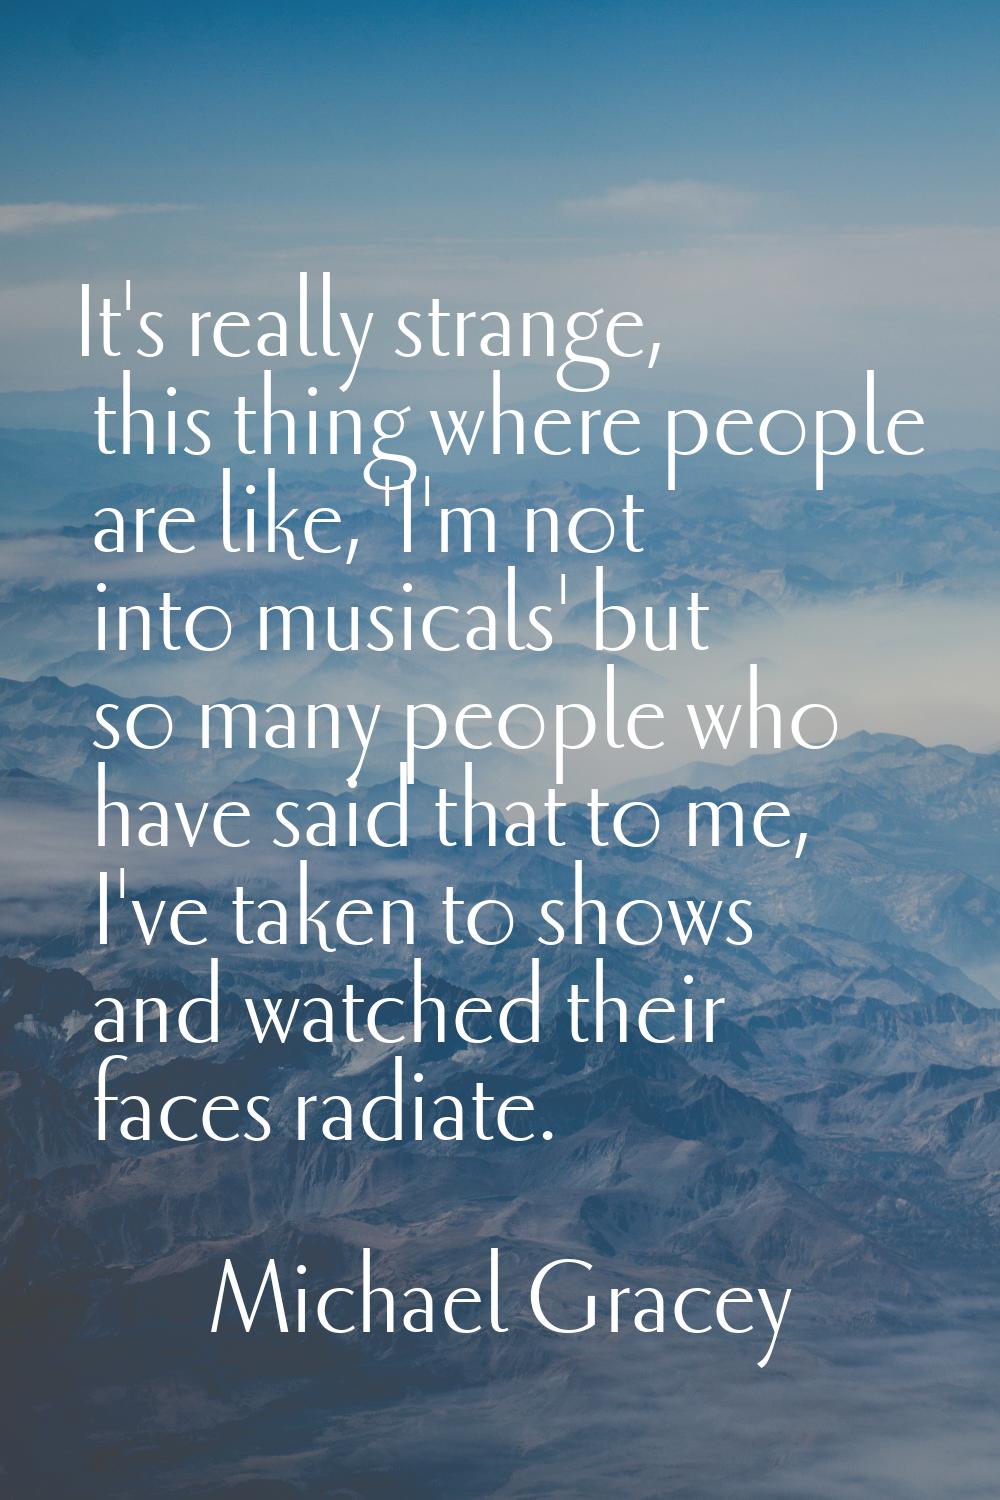 It's really strange, this thing where people are like, 'I'm not into musicals' but so many people w